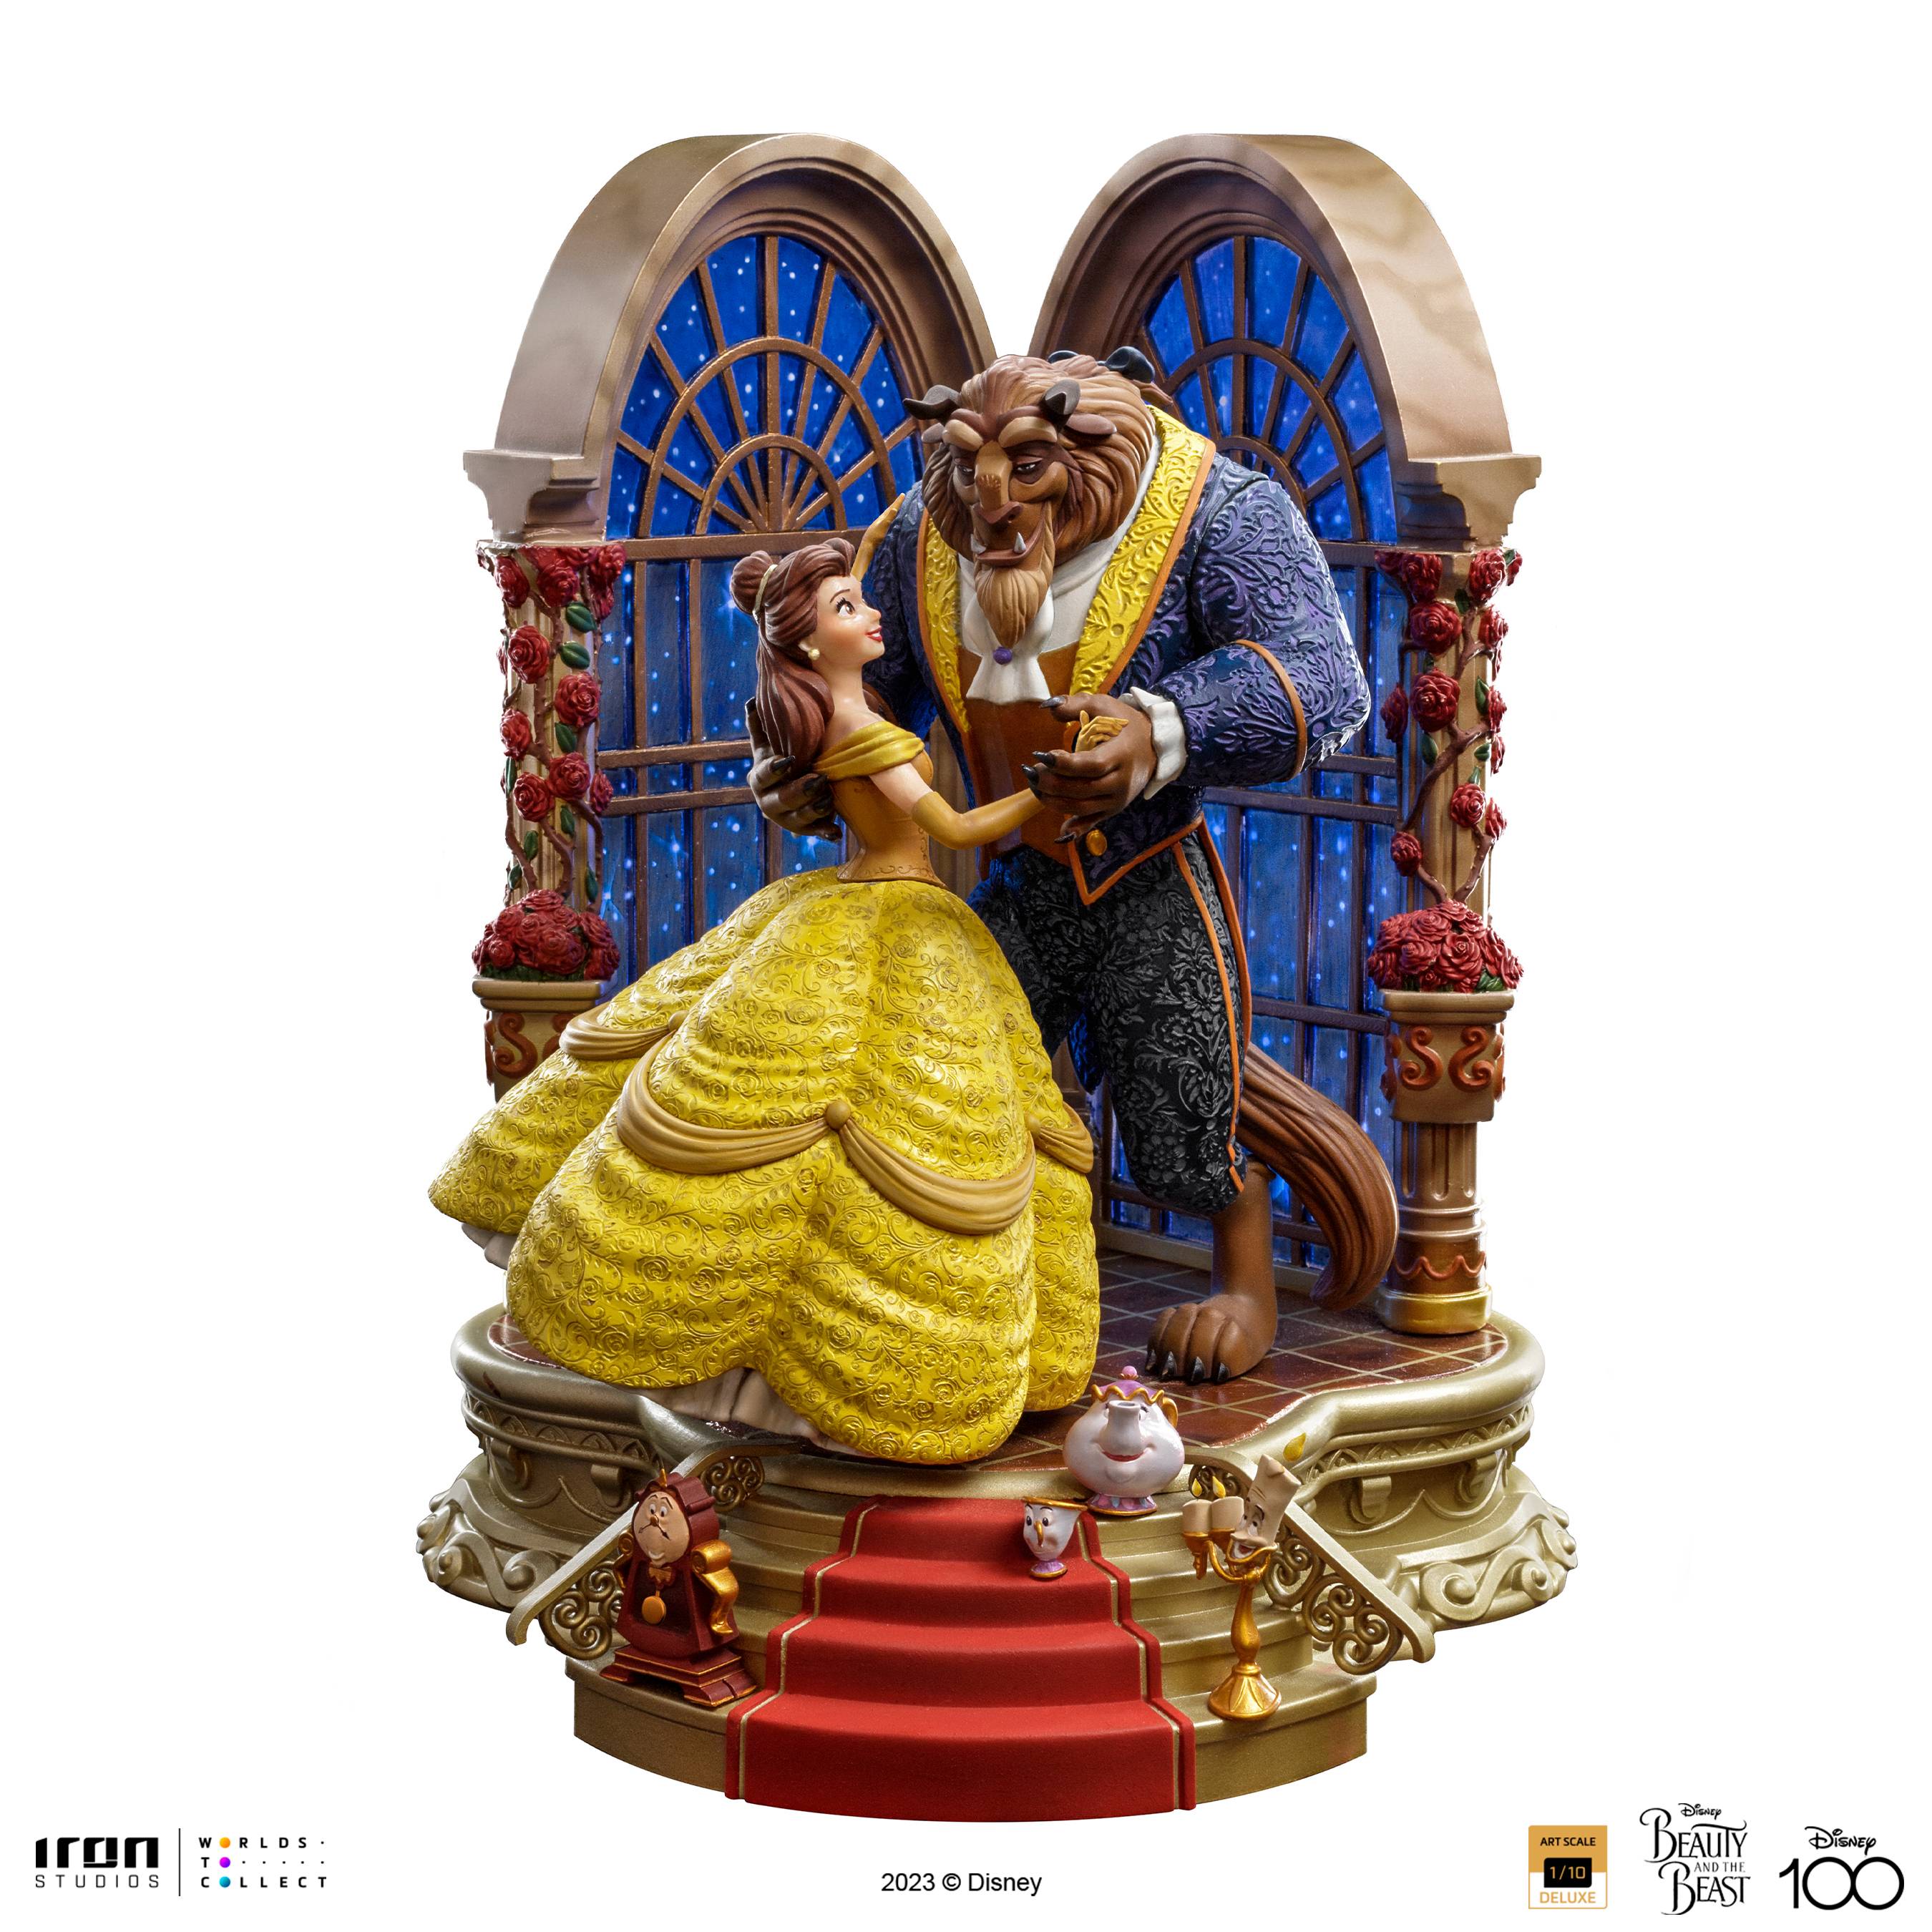 DISNEY 100TH BEAUTY AND THE BEAST ART DELUXE SCALE 1/10 STAT